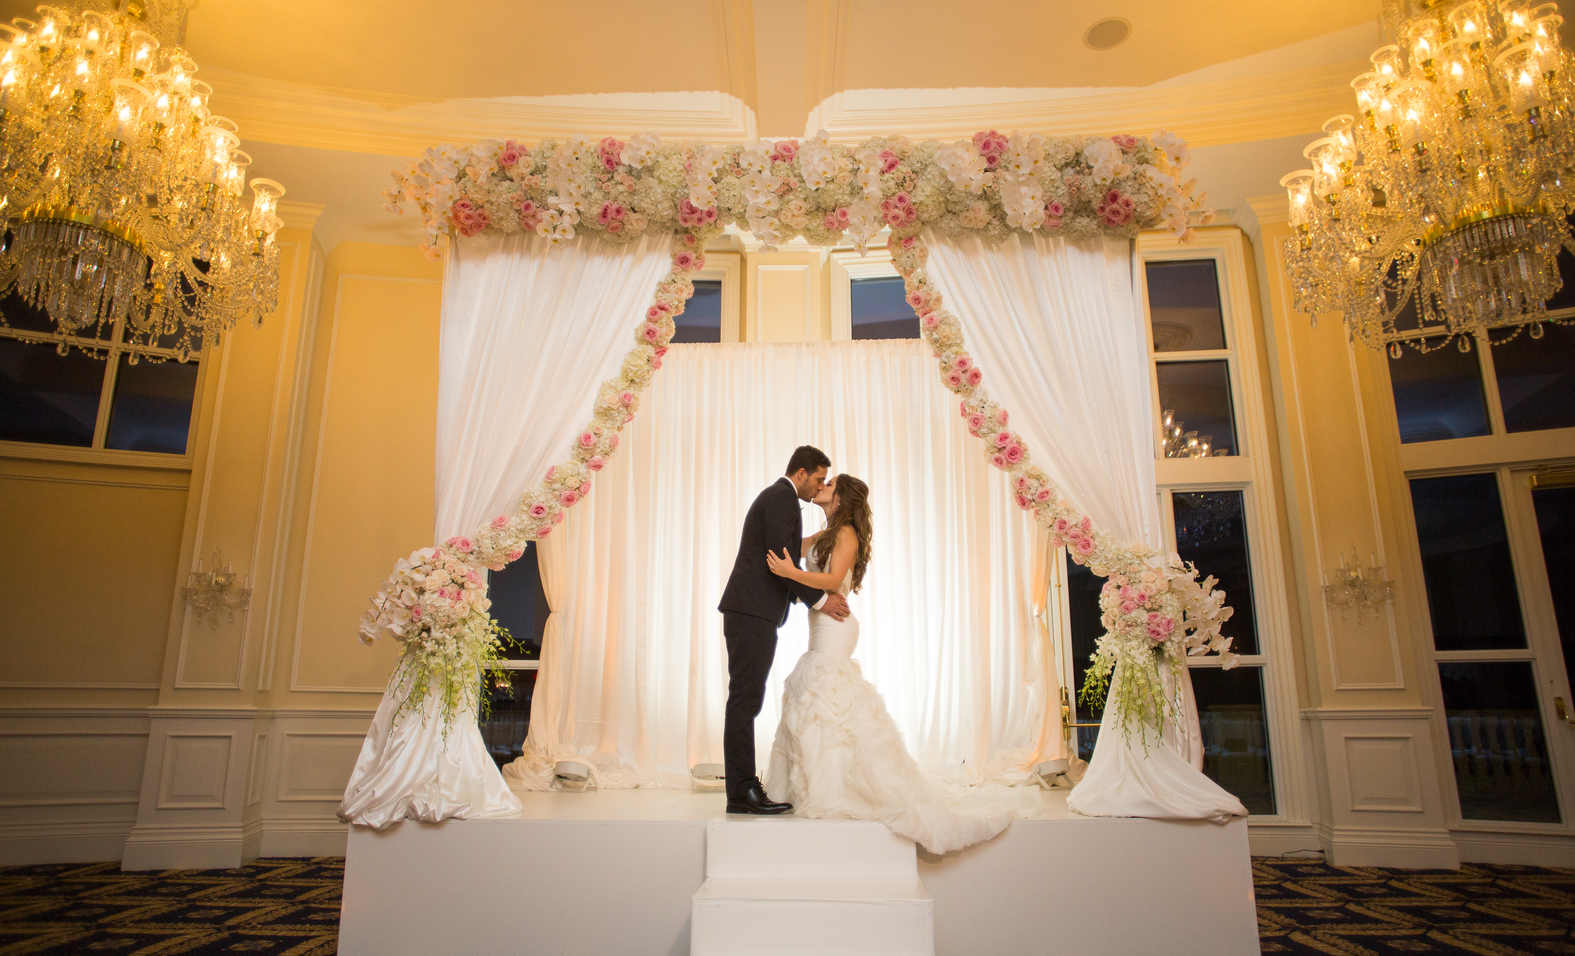 Panache Style - your wedding planning company for Fort Lauderdale and Miami